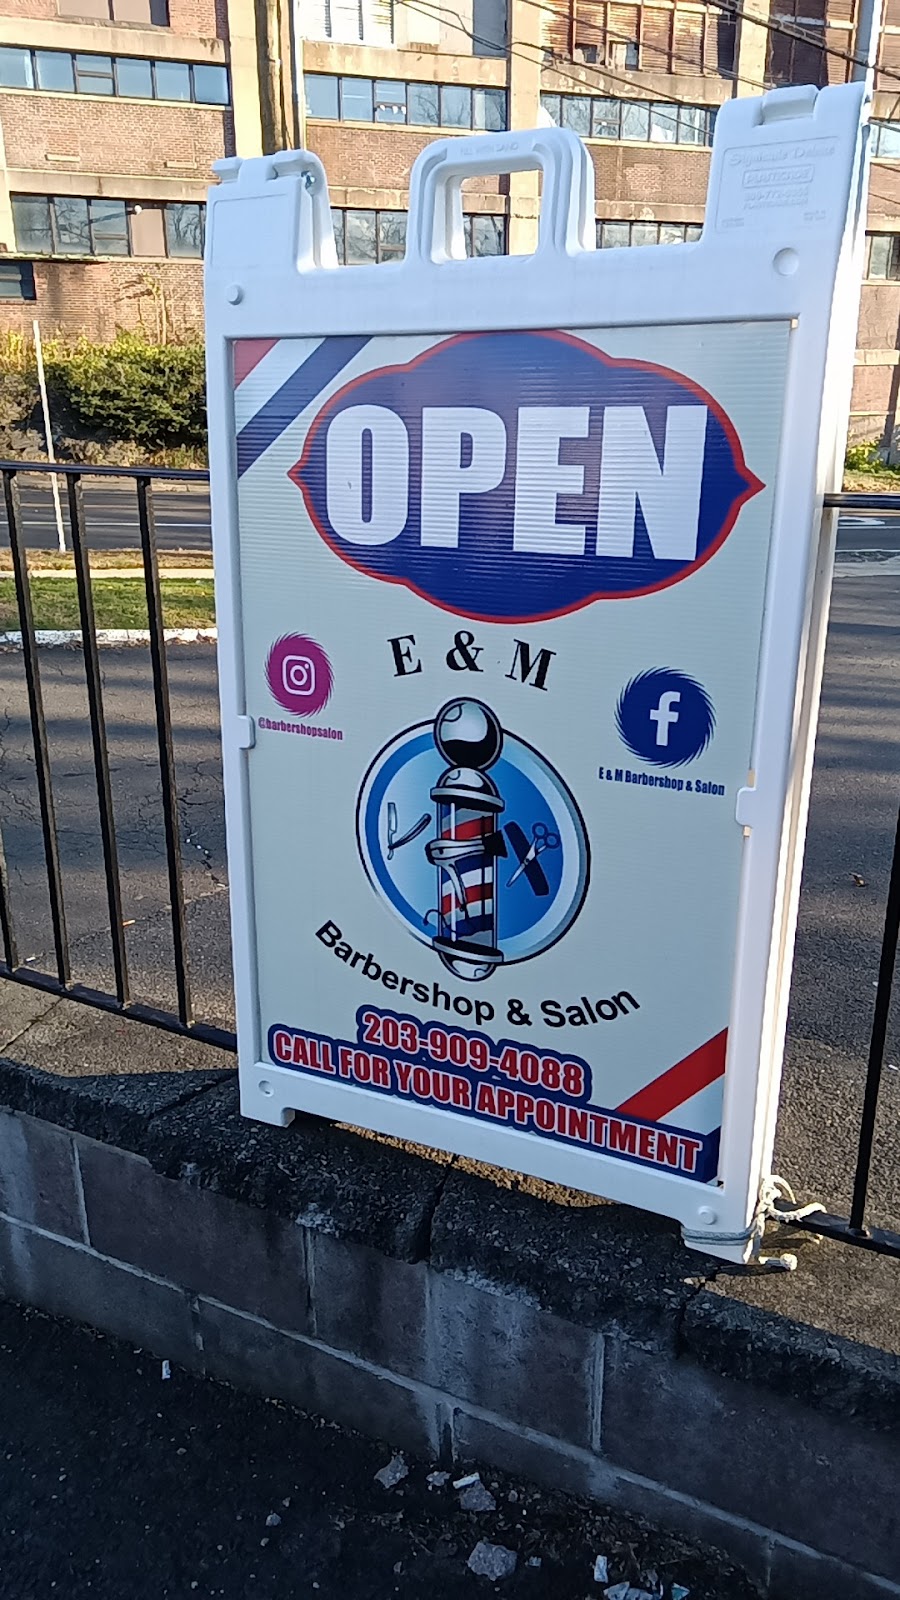 E & M Barbershop & Salon | 38 Saw Mill Rd, West Haven, CT 06516 | Phone: (203) 909-4088